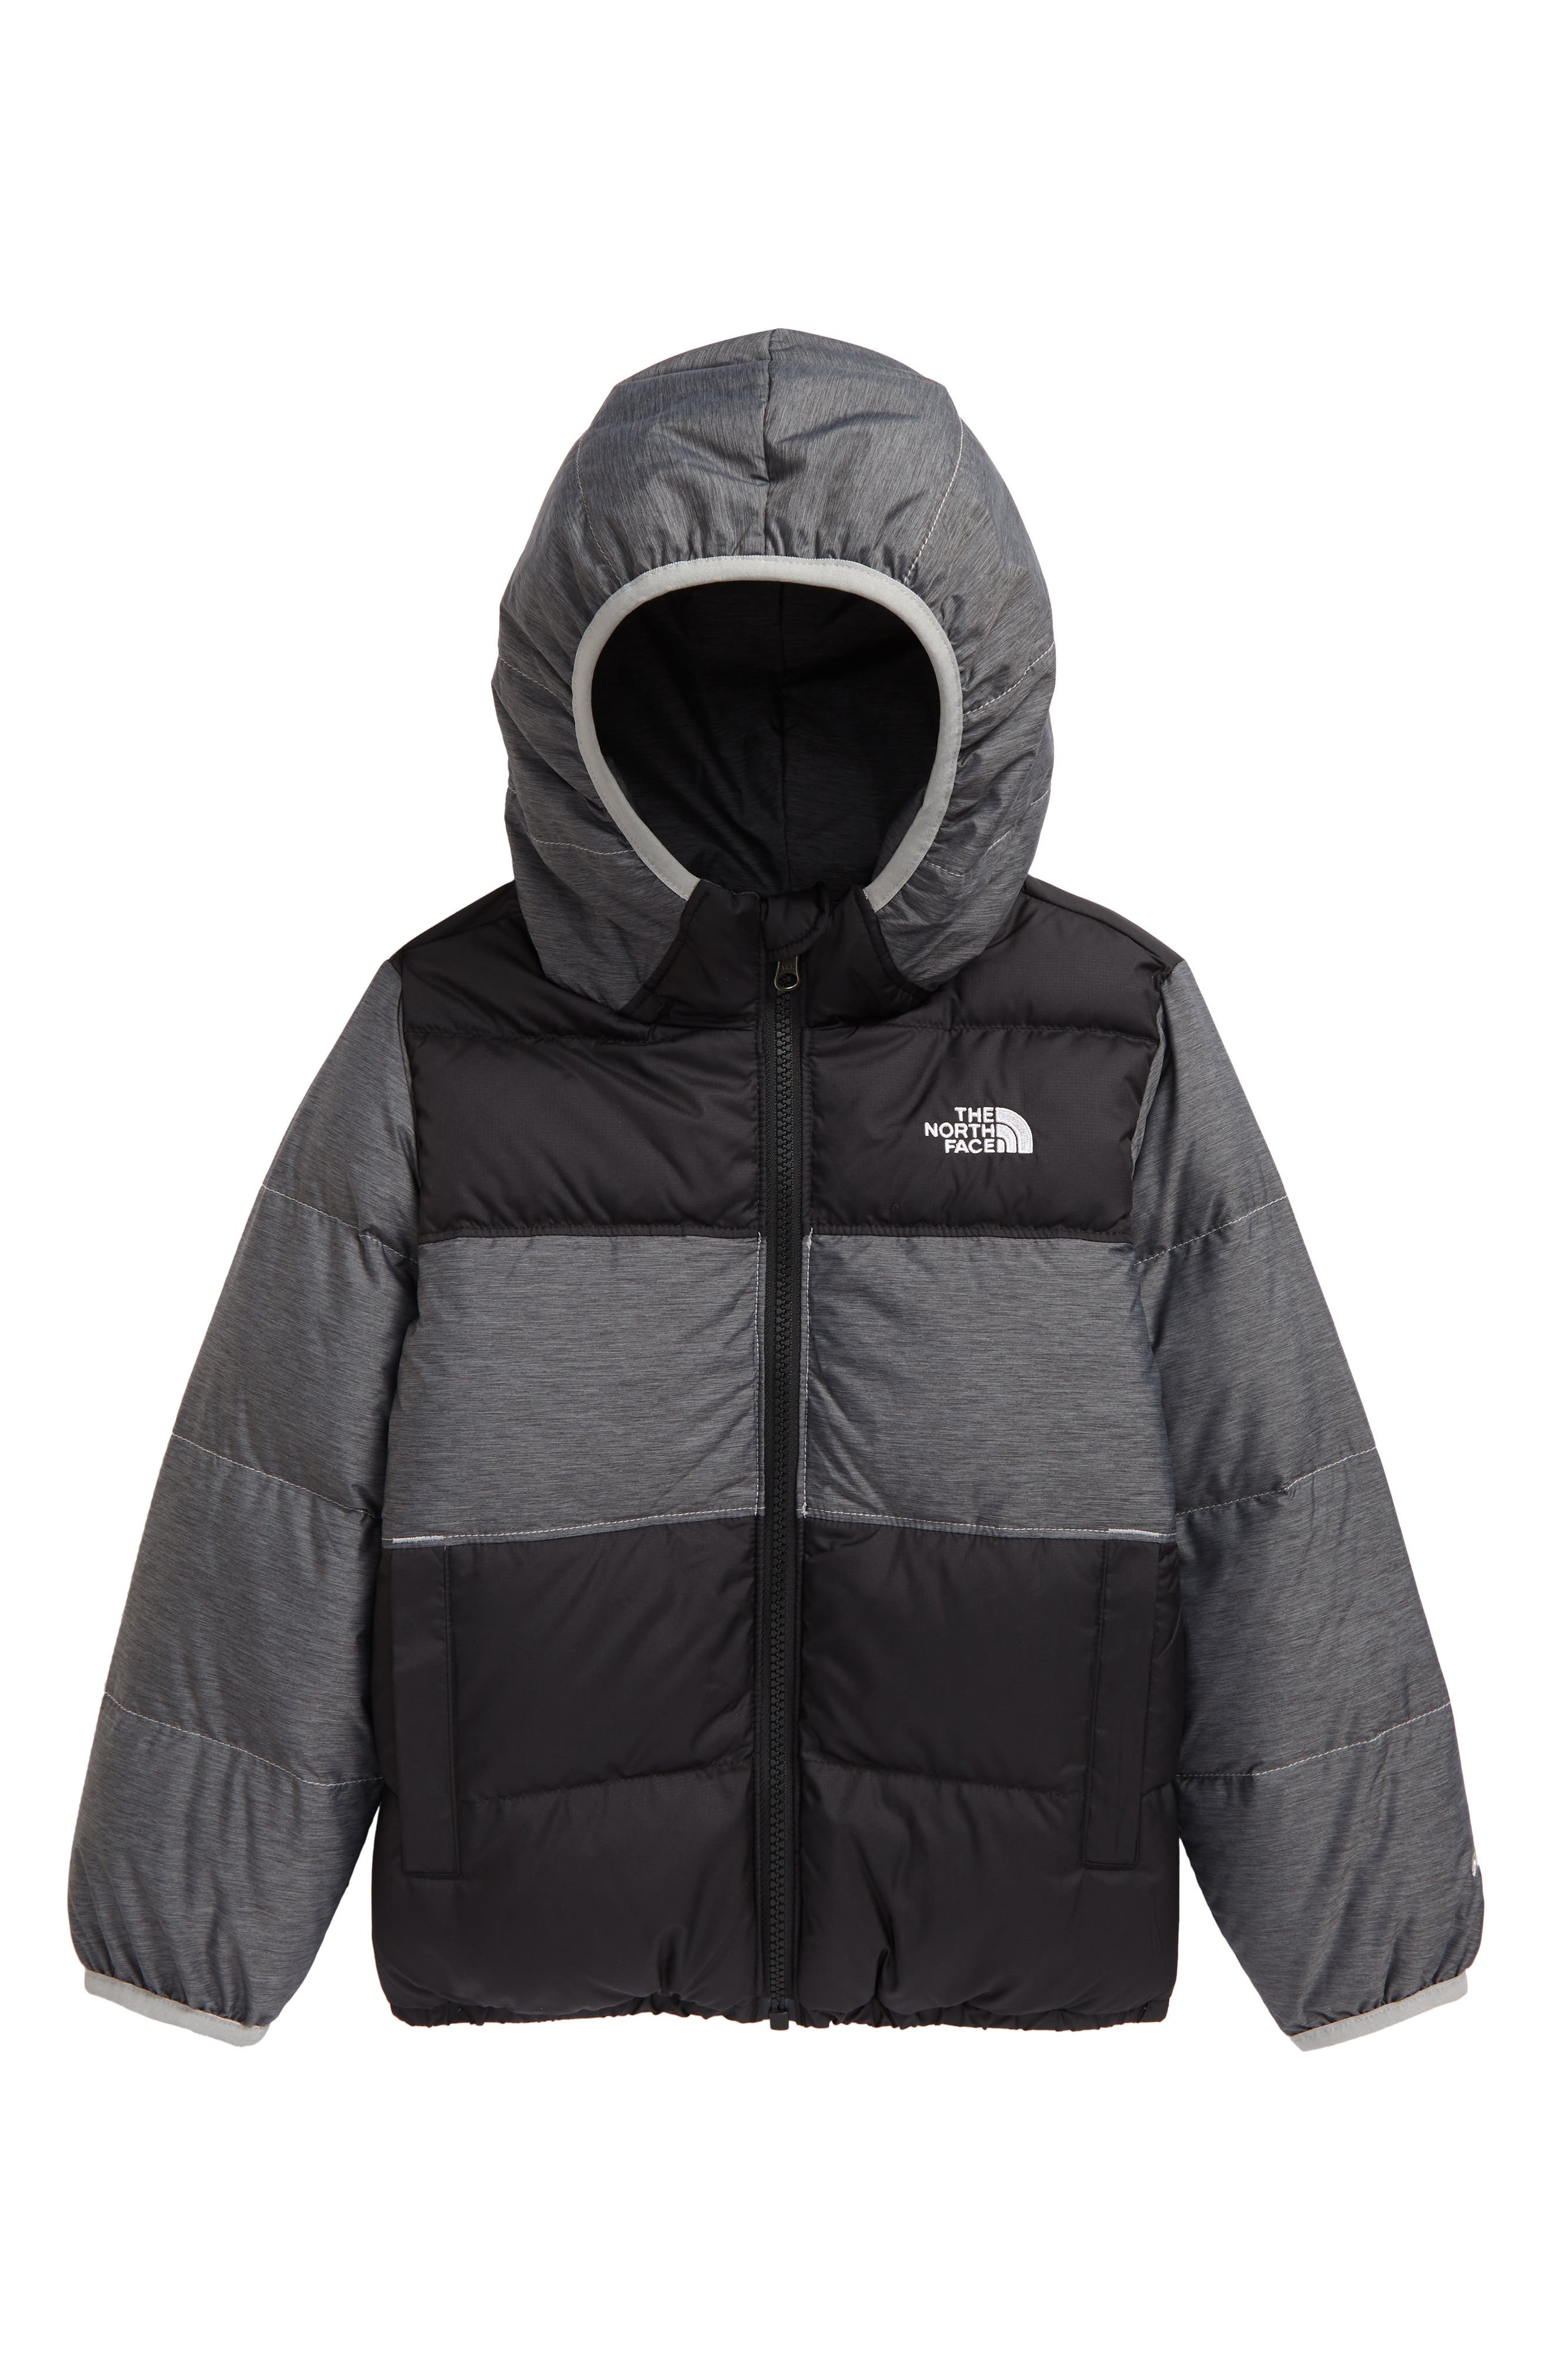 The North Face Kids' 'Moondoggy' Water 